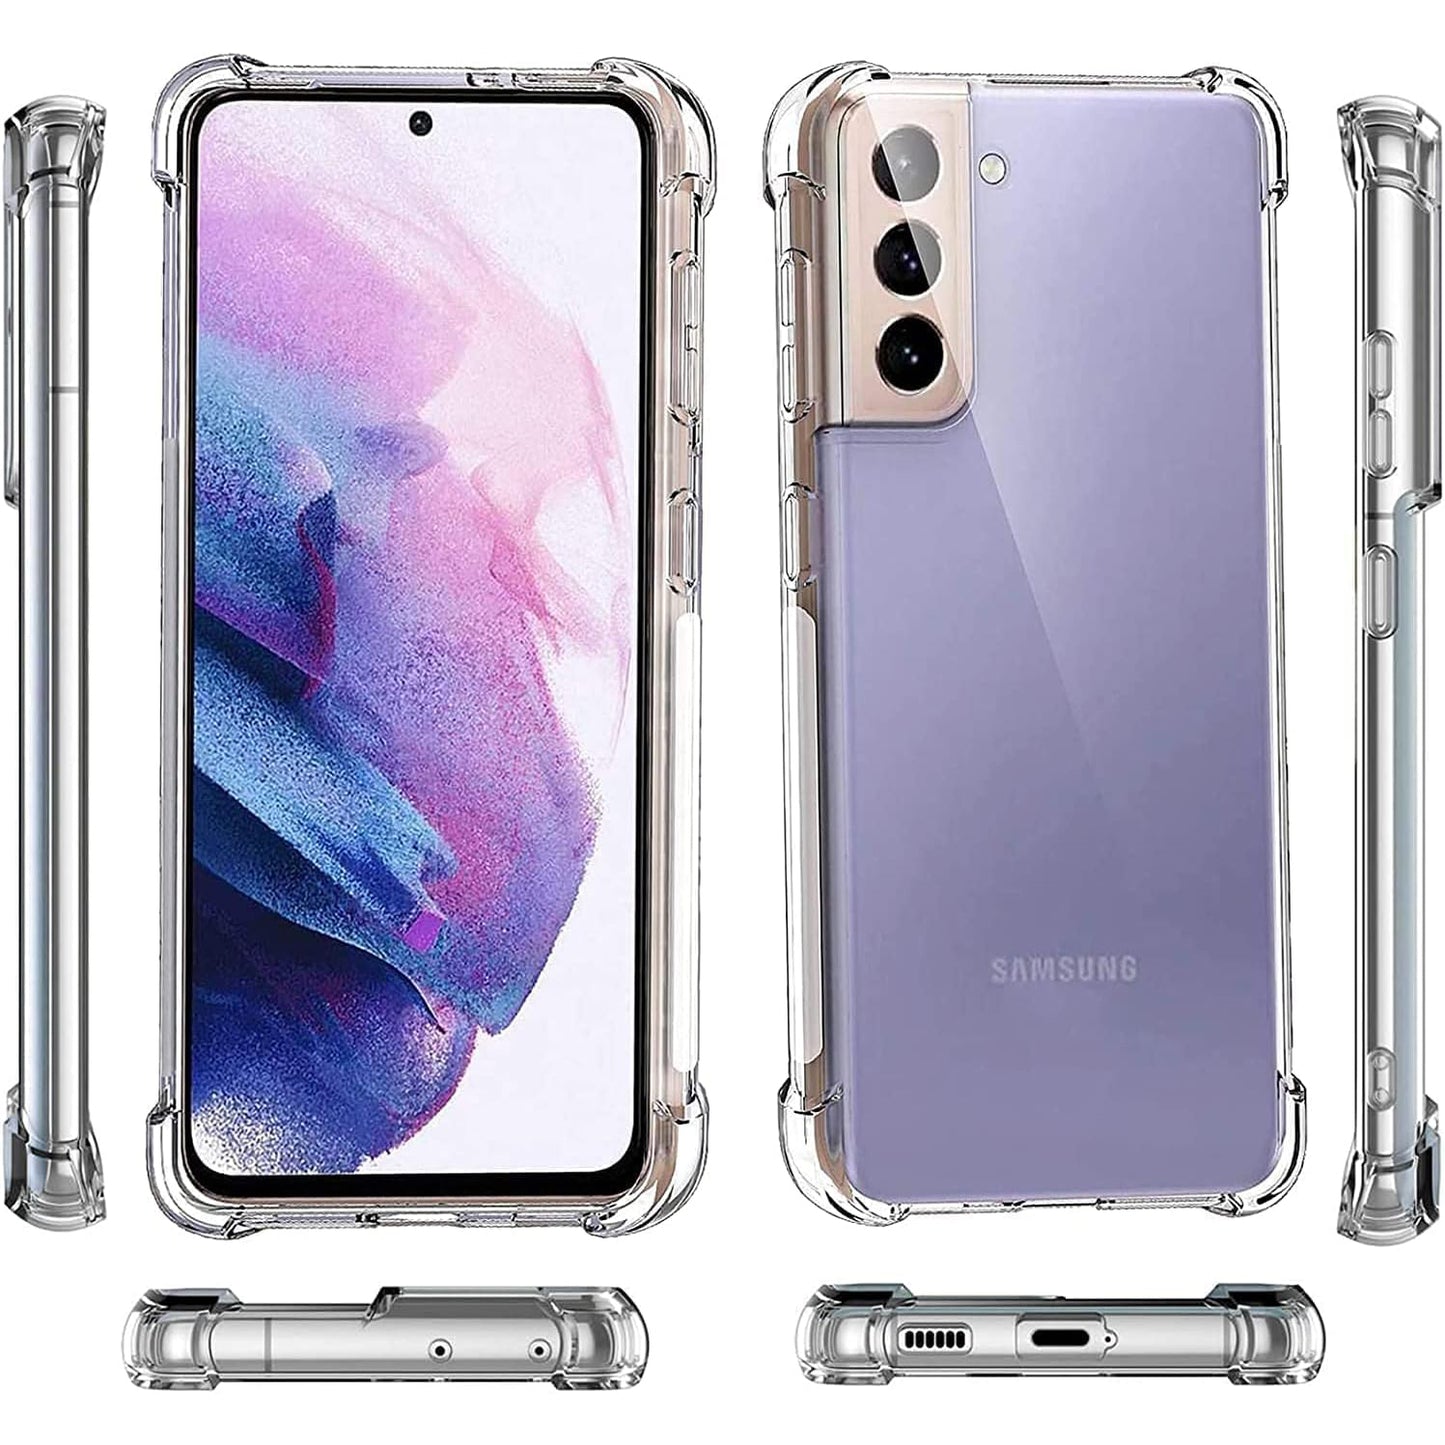 Fashionarie Club Cover Case for Samsungg S20, S21, S22, S23 Plus Ultra Cover Case Soft Silicon Transparent Cover Shockproof Protective Bumper Corners